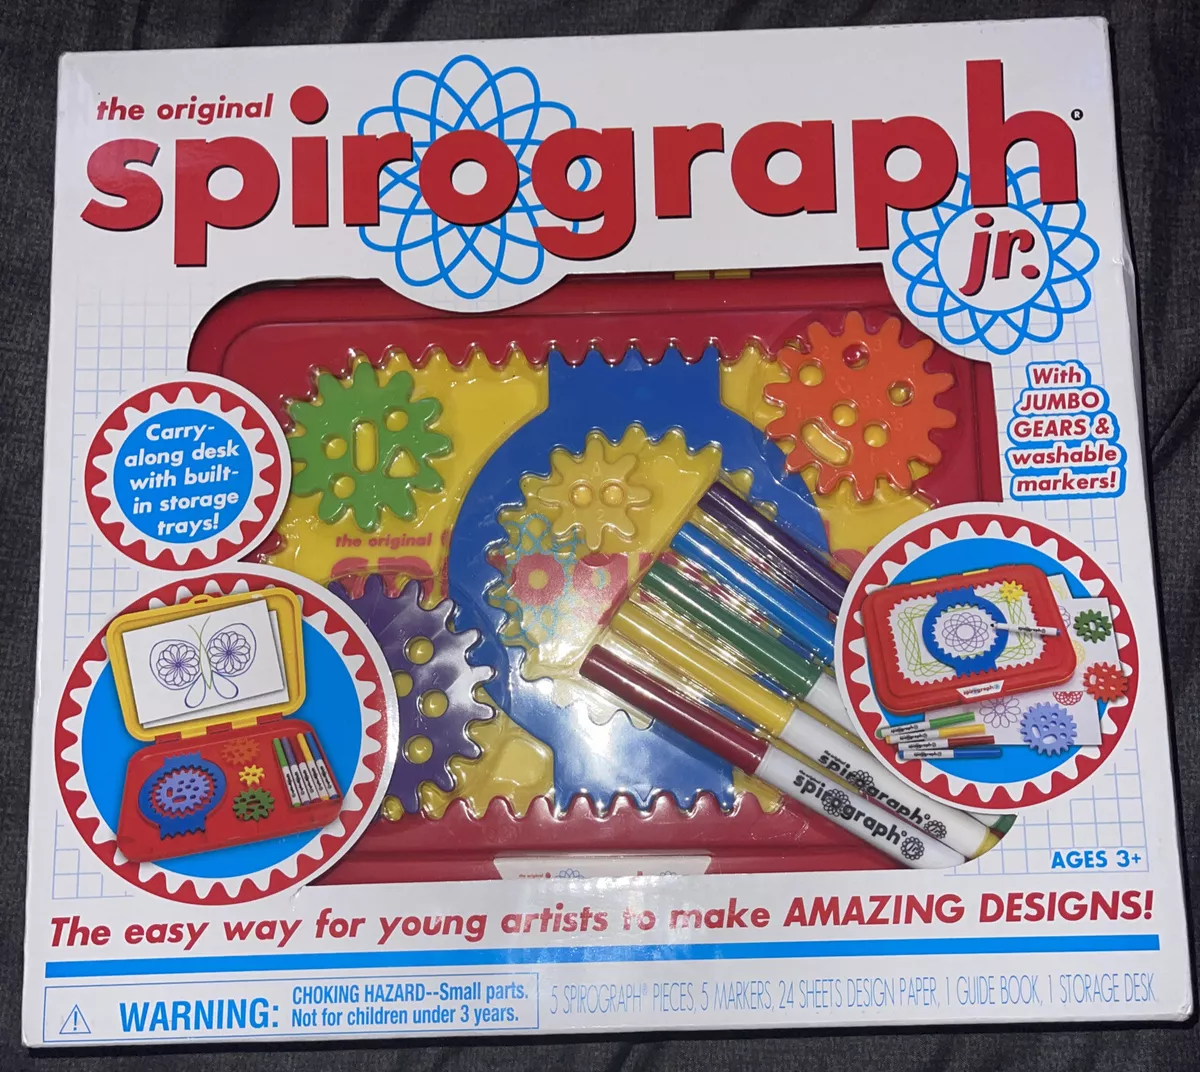 PlayMonster Spirograph JR Create and Color Activity Set 819441010239